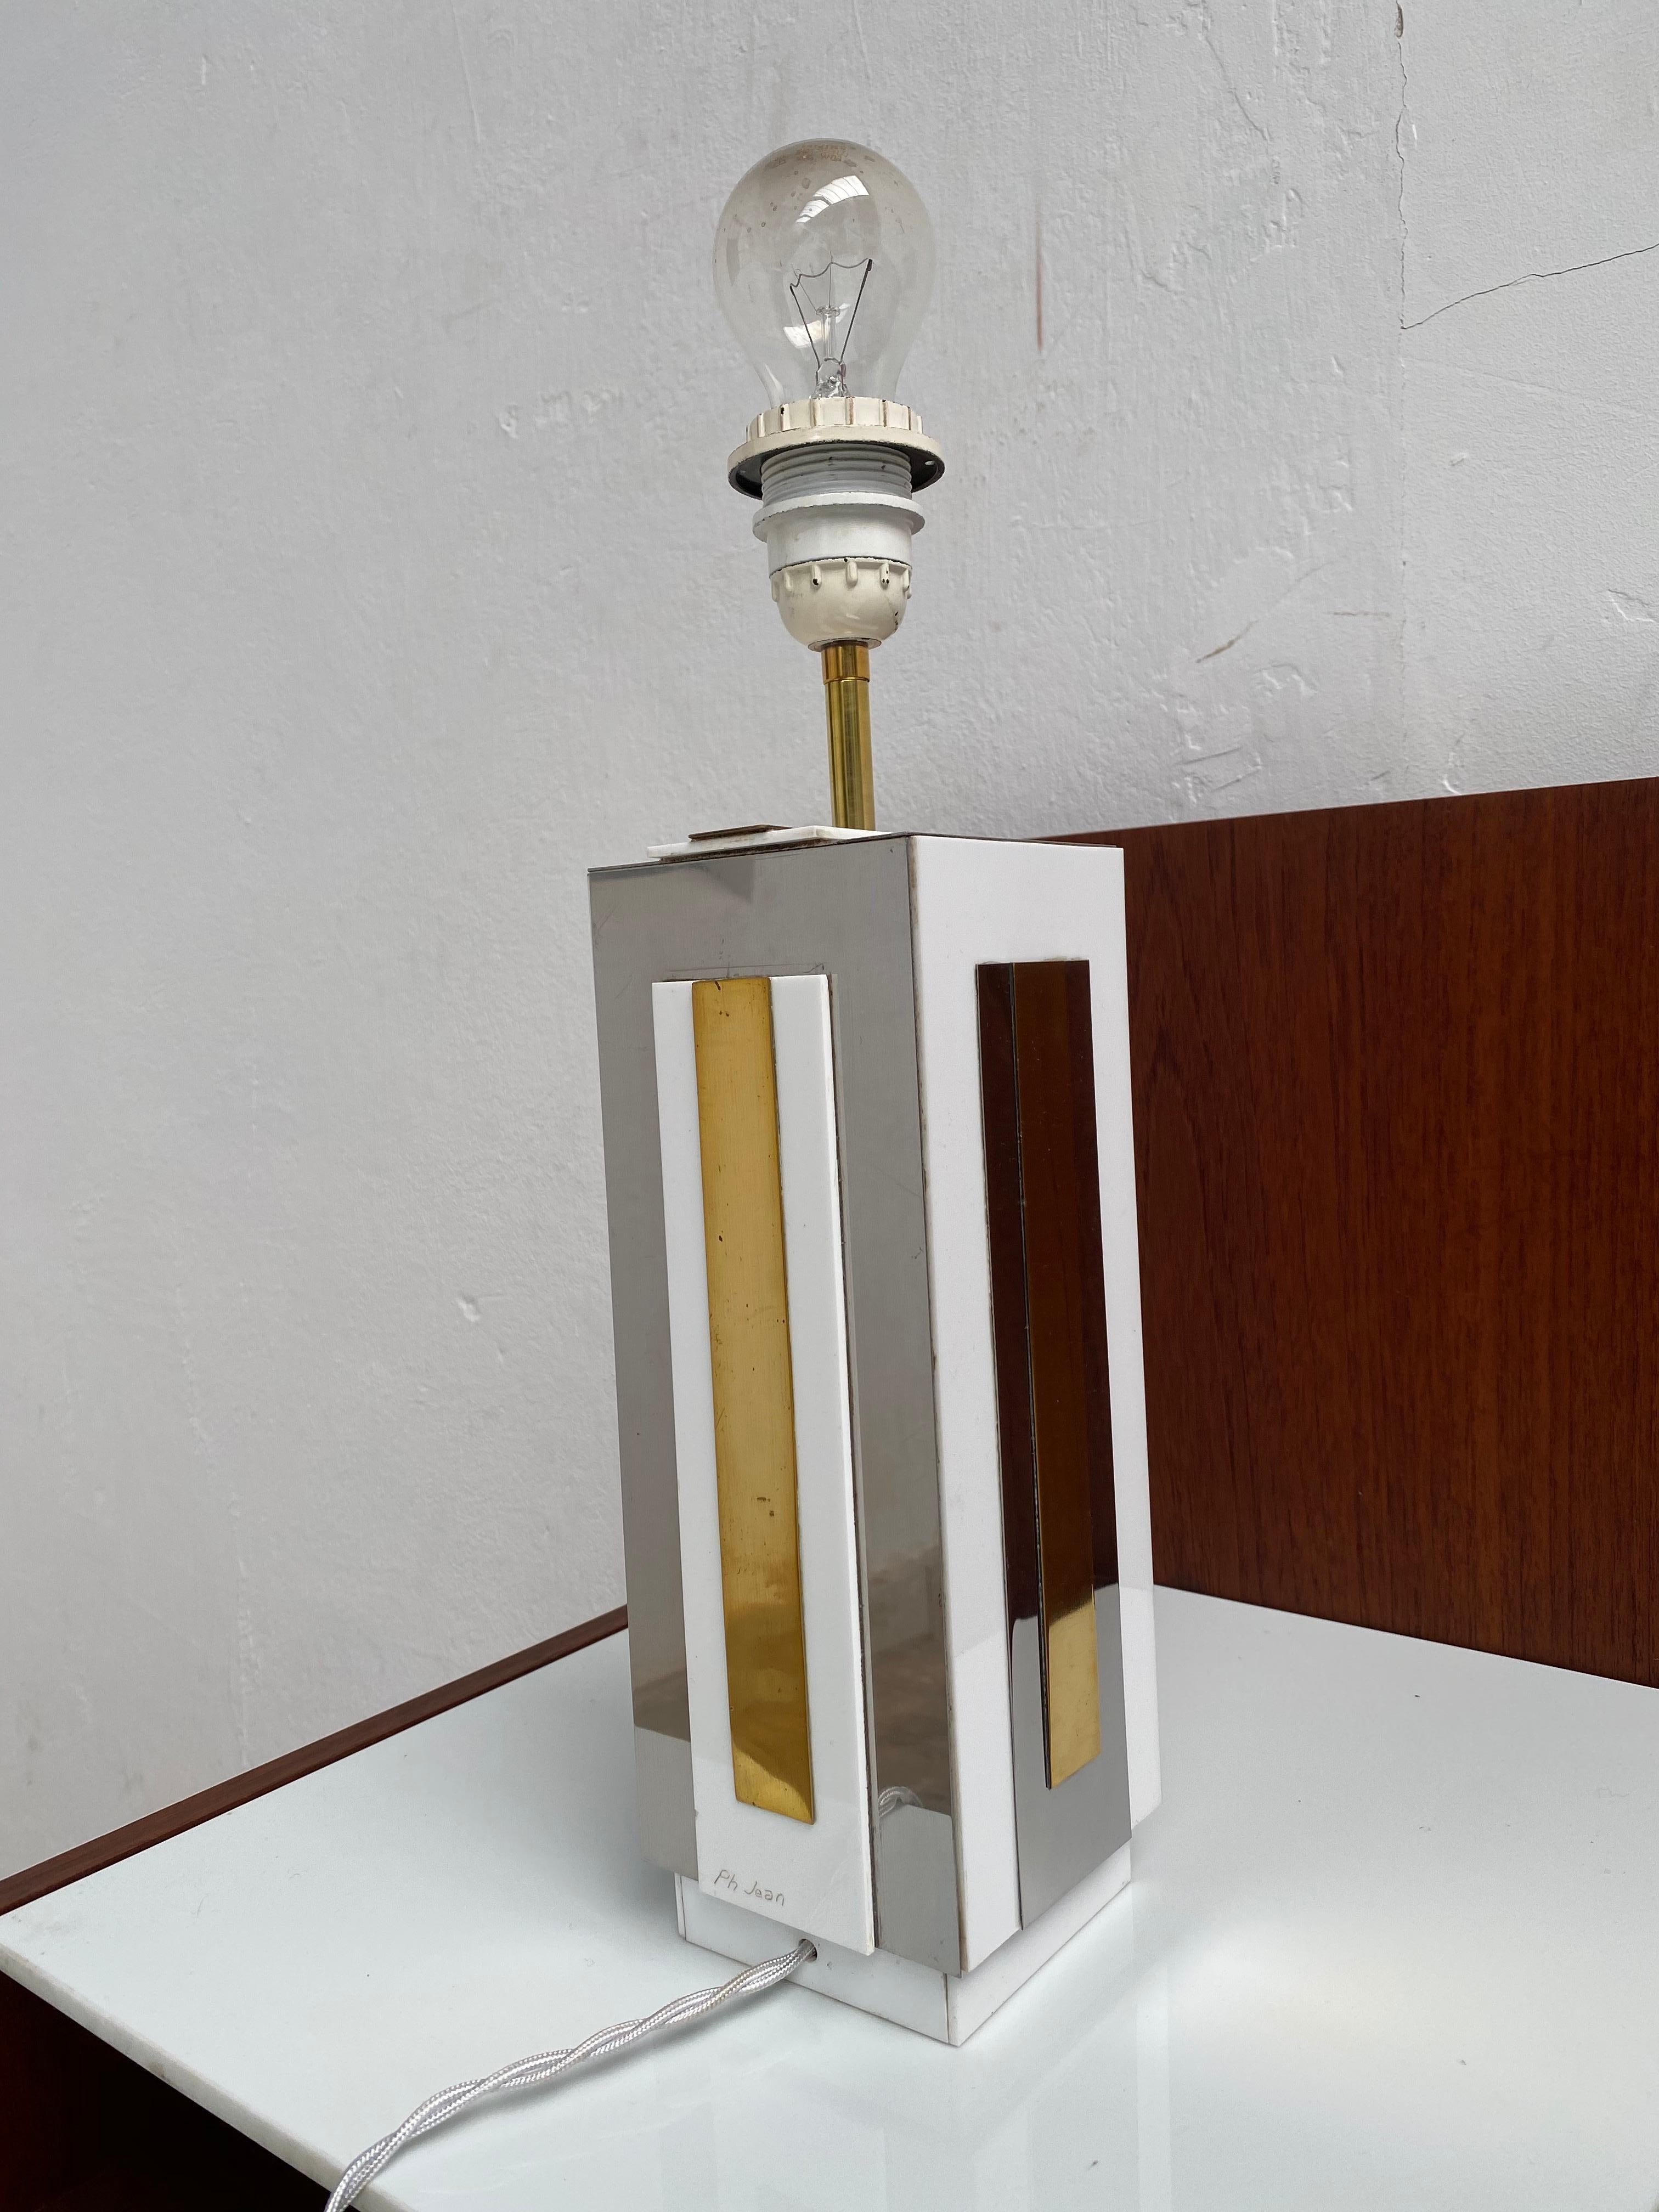 Sculptural Relief Table Lamp by Sculptor 'PH Jean' 1970 Brass Inox Lucite Signed For Sale 7